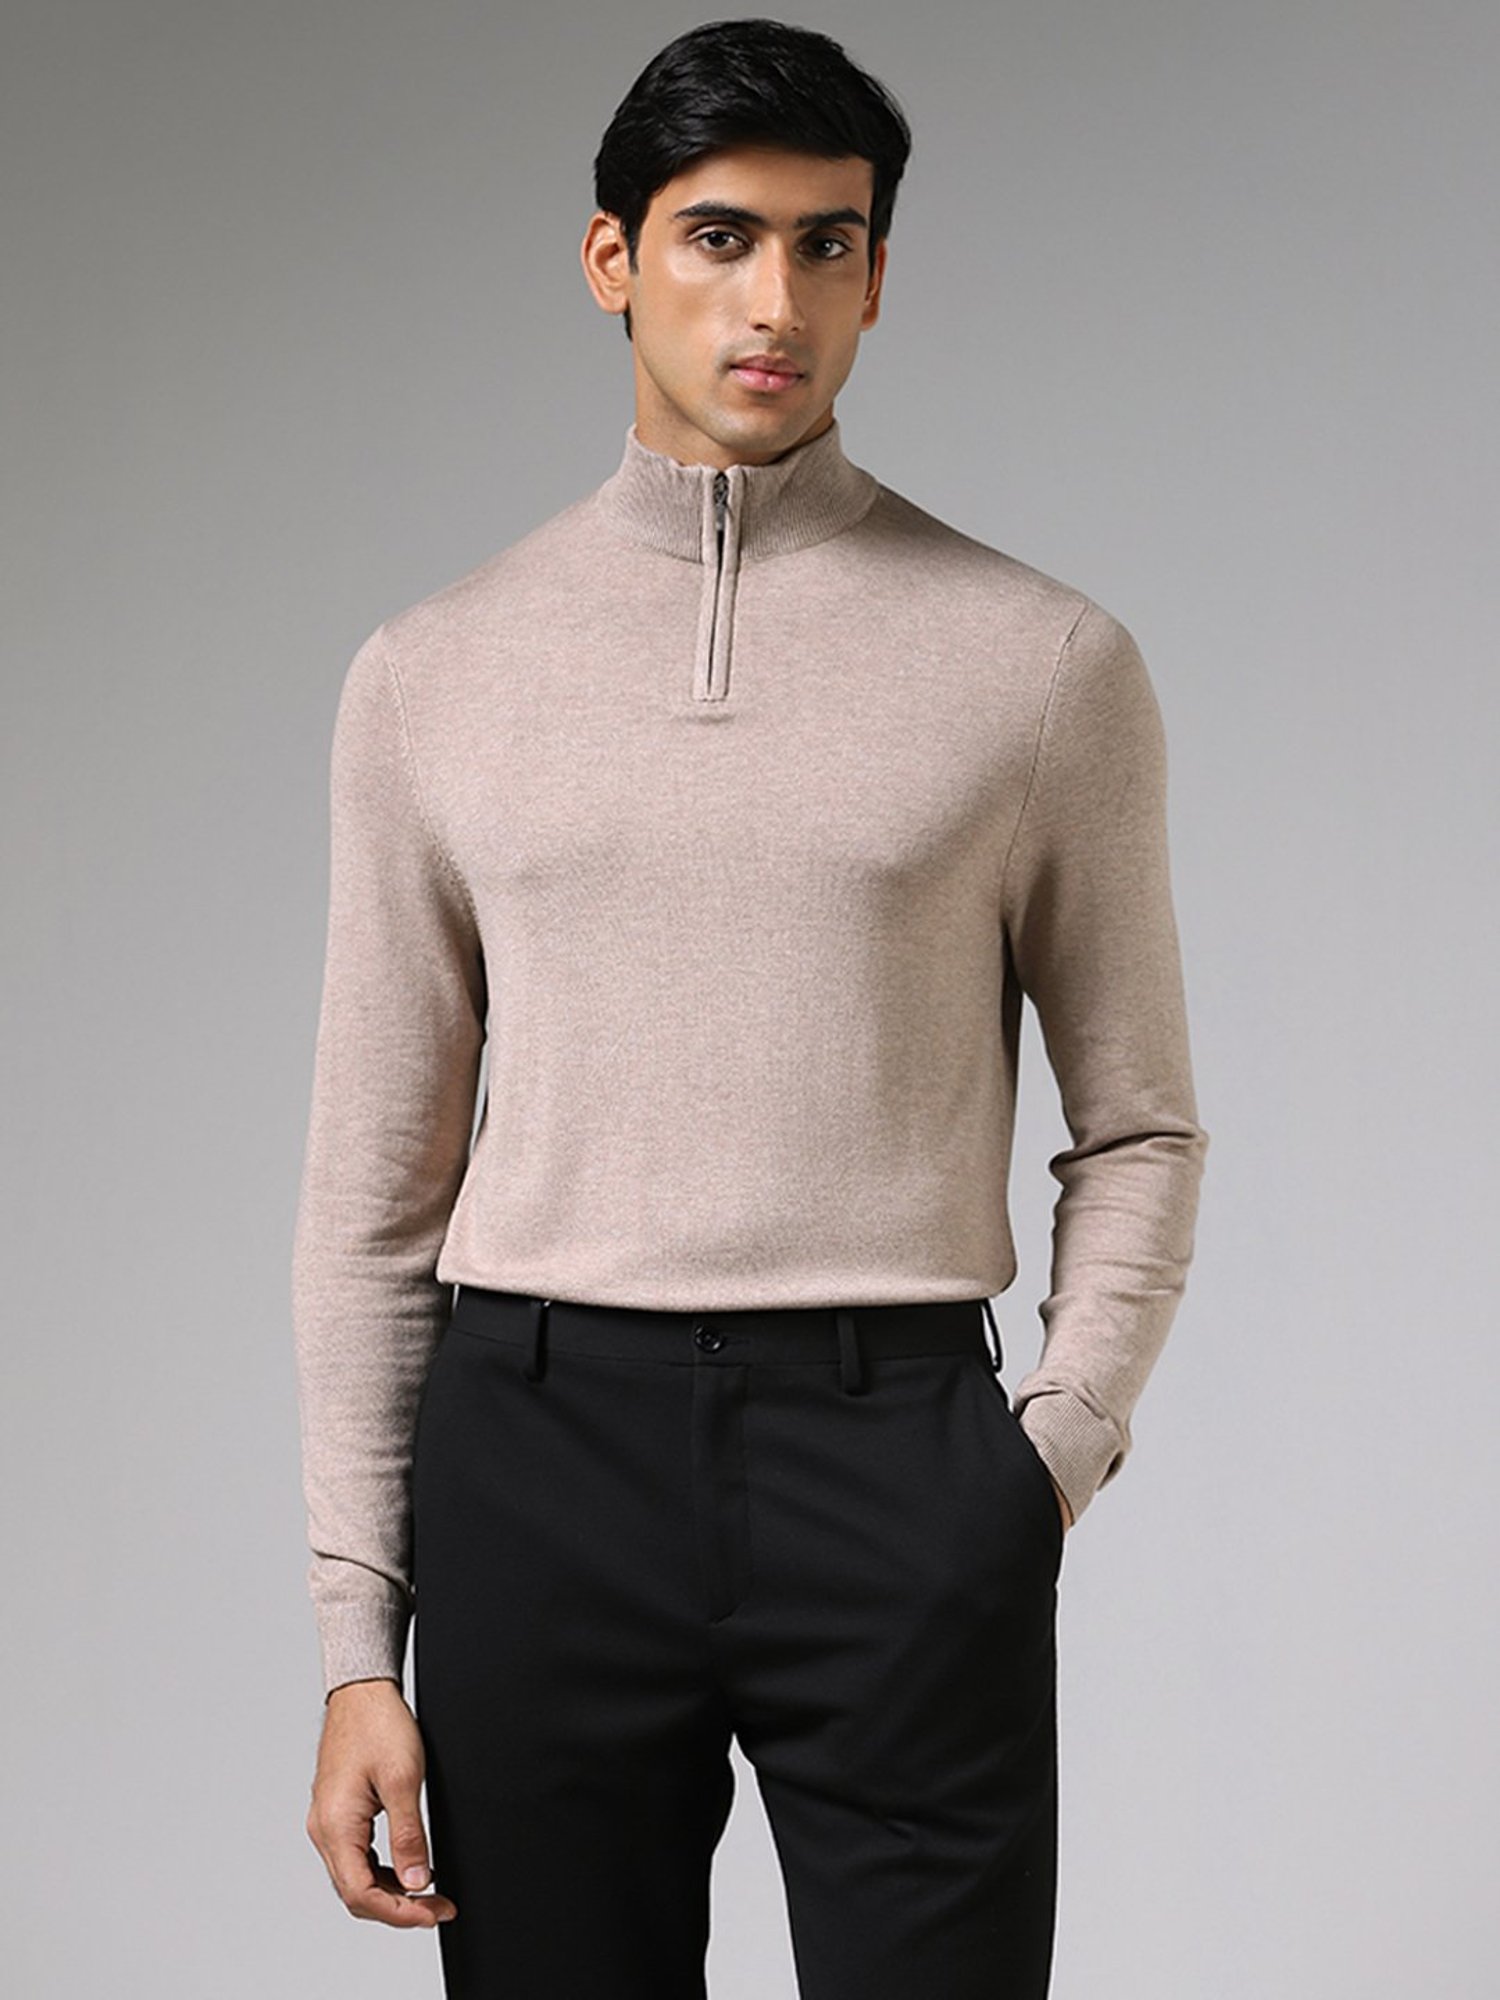 Buy WES Formals Solid Off White Slim Fit Turtle Neck Sweater from Westside